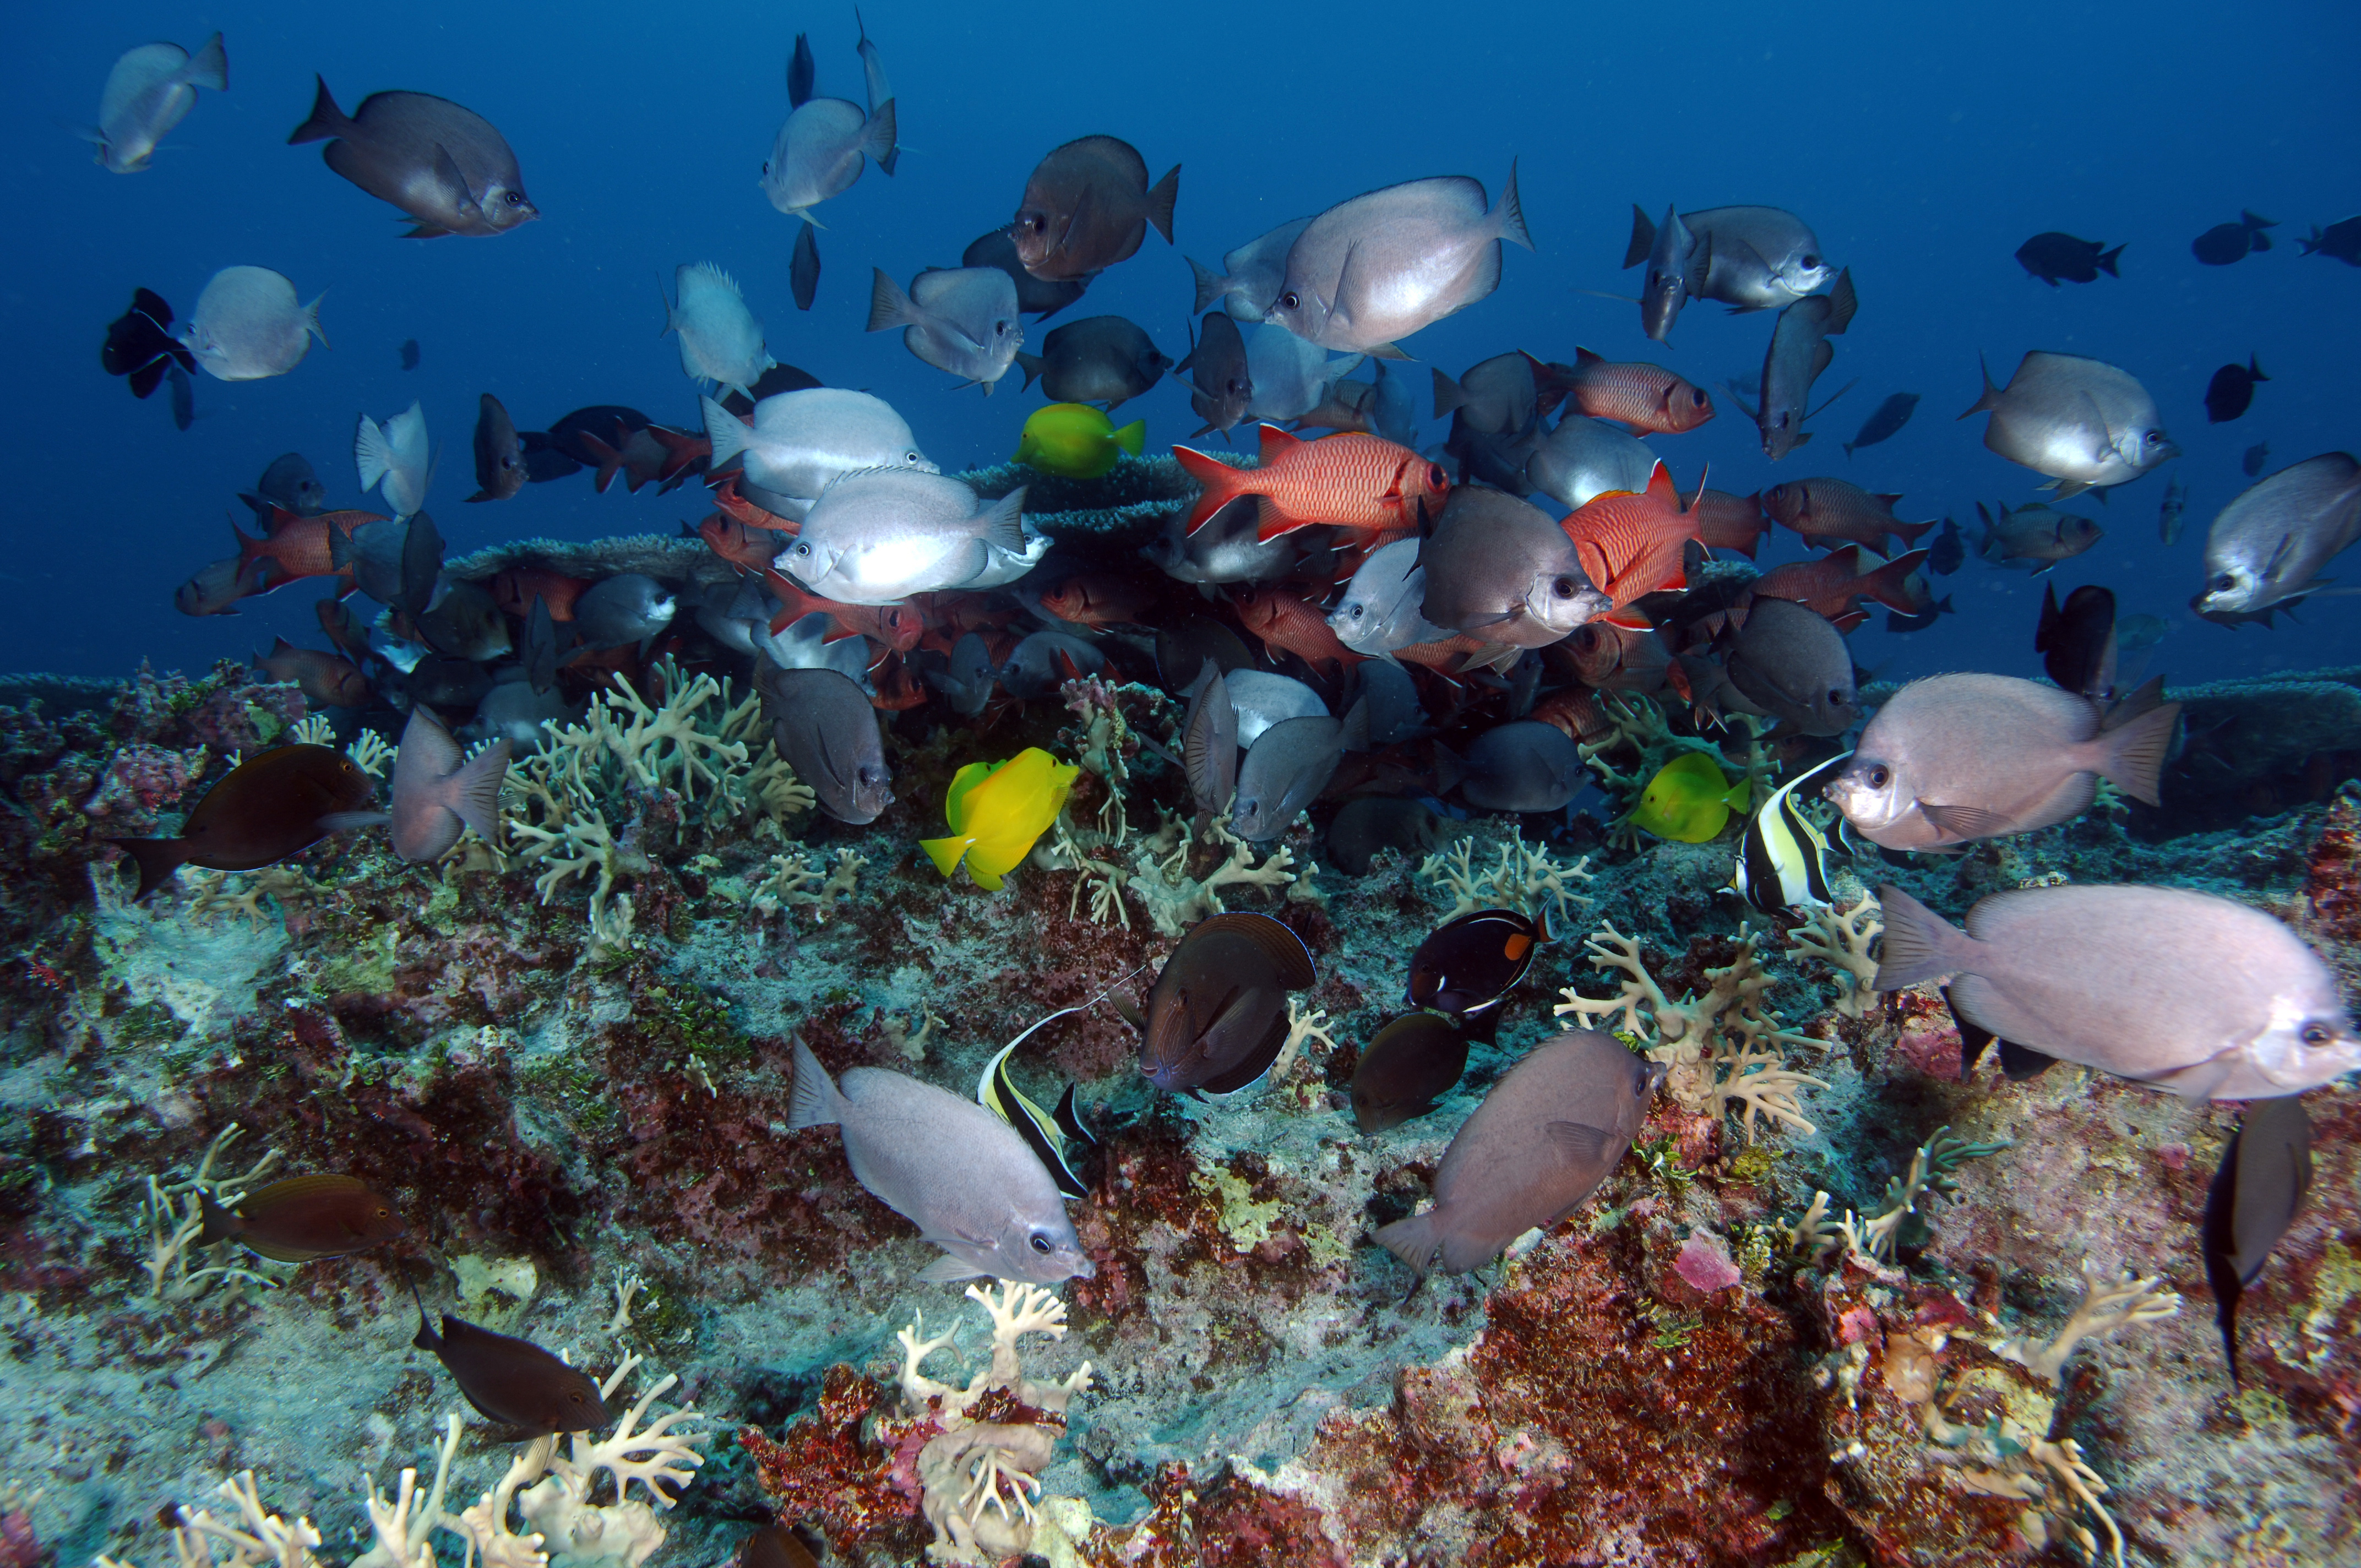 A wild name, and an amazing, vast, new marine sanctuary · A Humane World